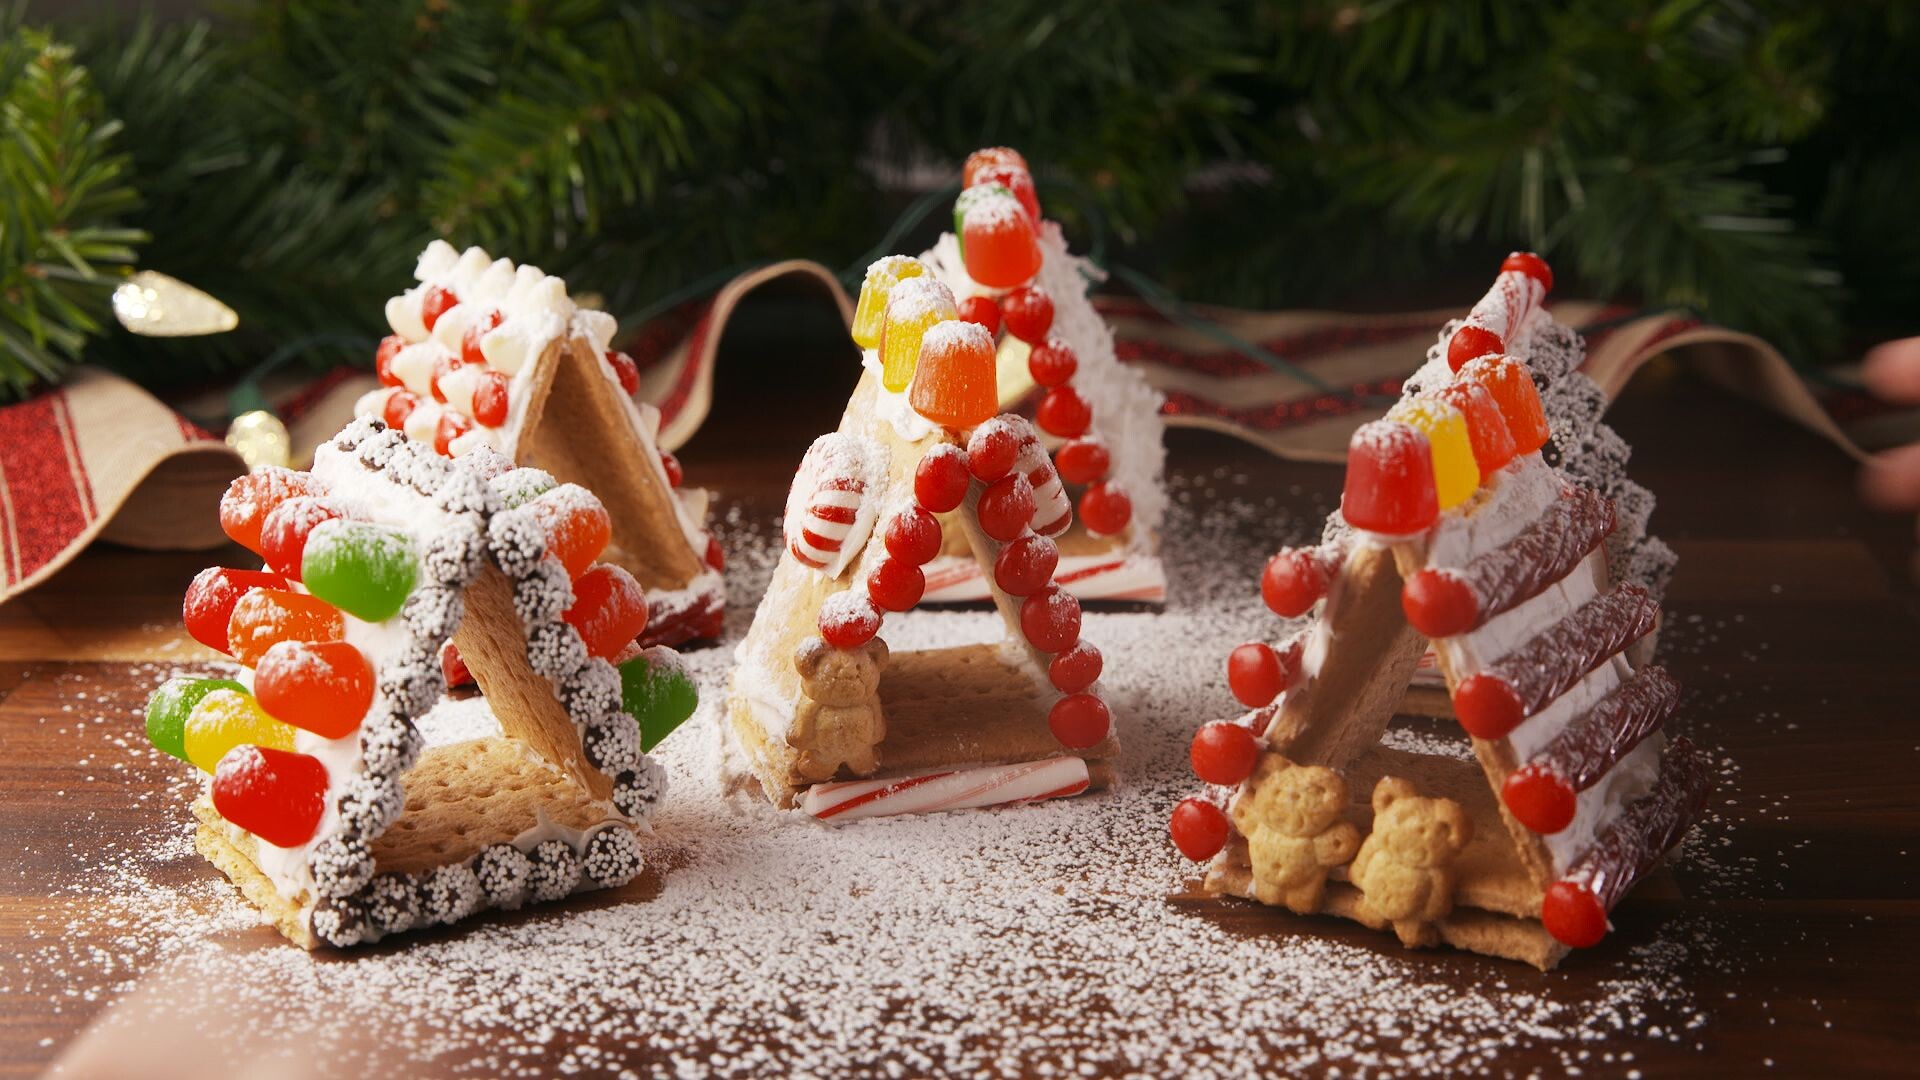 Mini gingerbread house recipe, Festive and delicious, Perfect holiday treat, Fun and easy to make, 1920x1080 Full HD Desktop